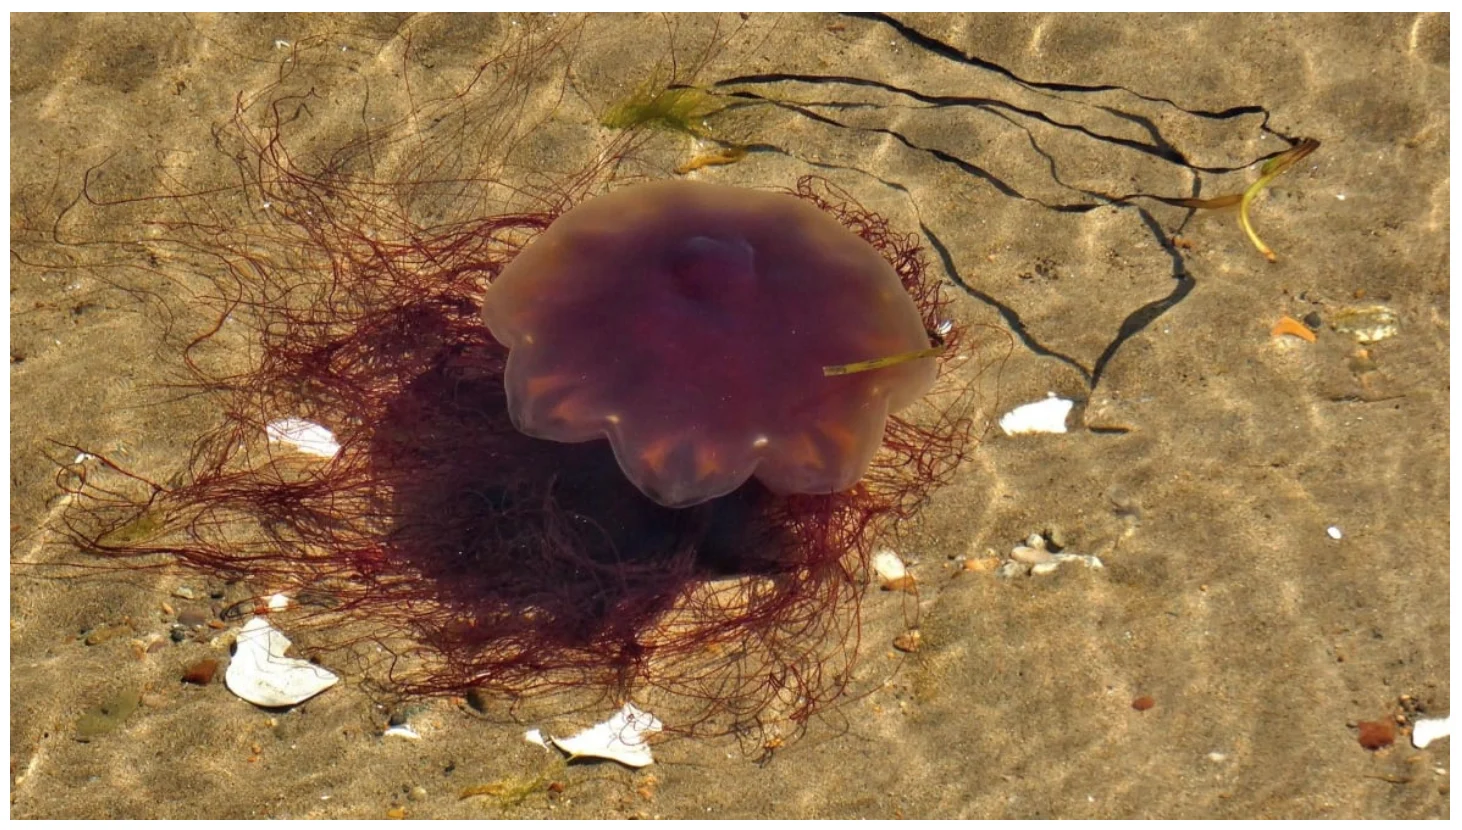 cbc: Lion's mane jellyfish tentacles shoot a barb that contains venom, which can sting even if the jellyfish is dead. The barbs cannot penetrate palms of human hands or soles of feet though, and they are fragile enough to be removed by rubbing sand on the skin. (Submitted by Sabine Bittner)